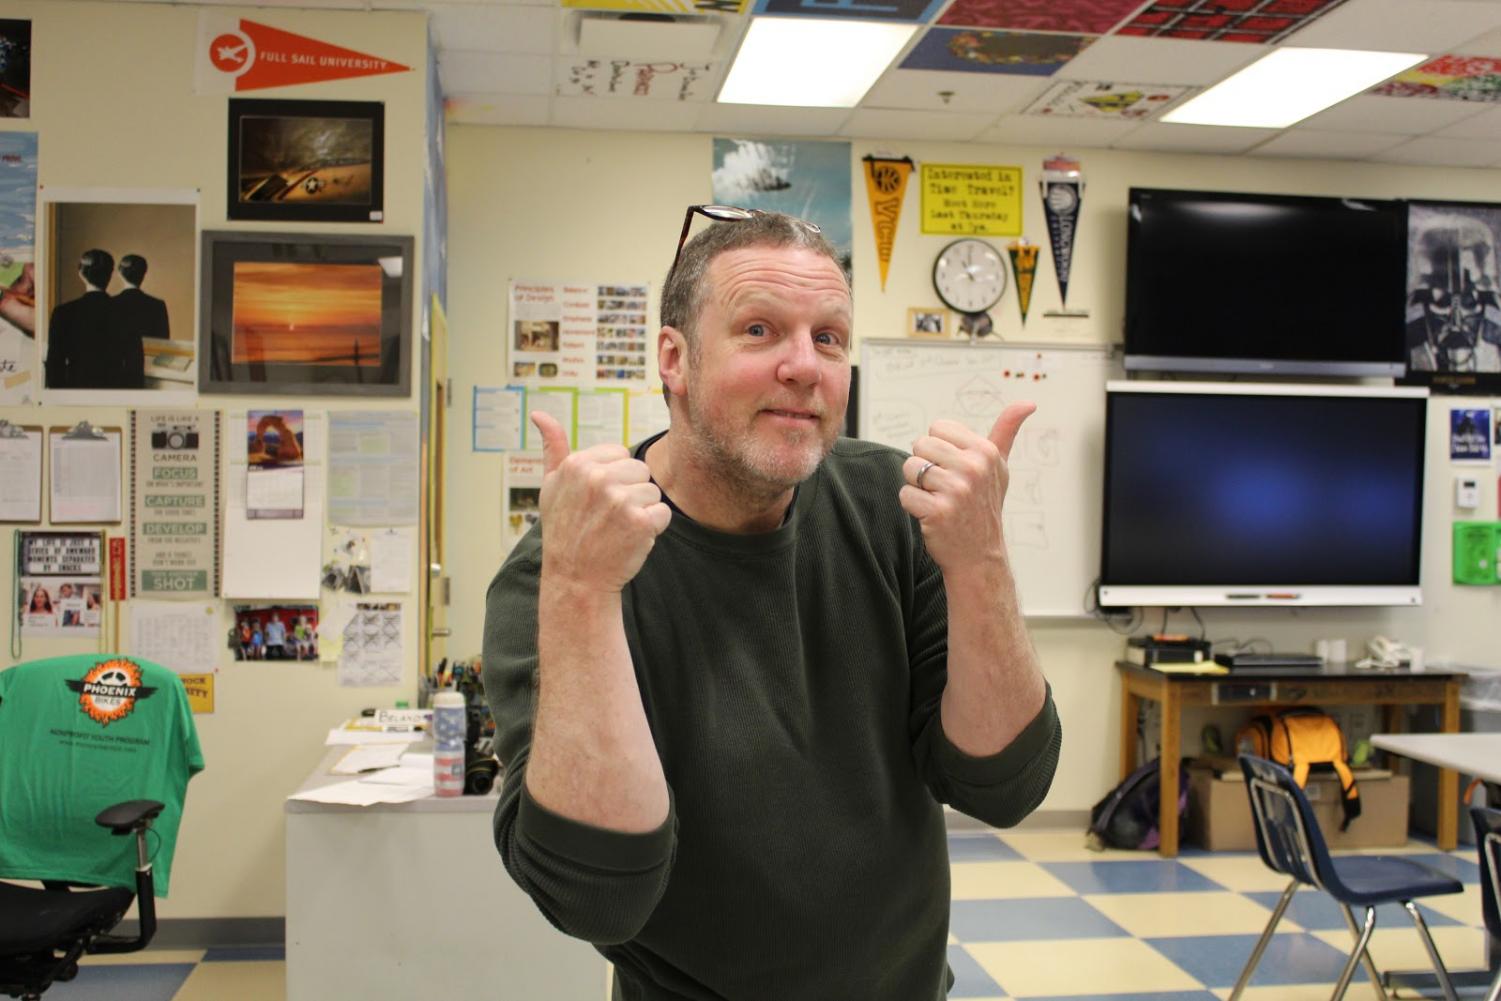 Mr. Beland gives a thumbs up